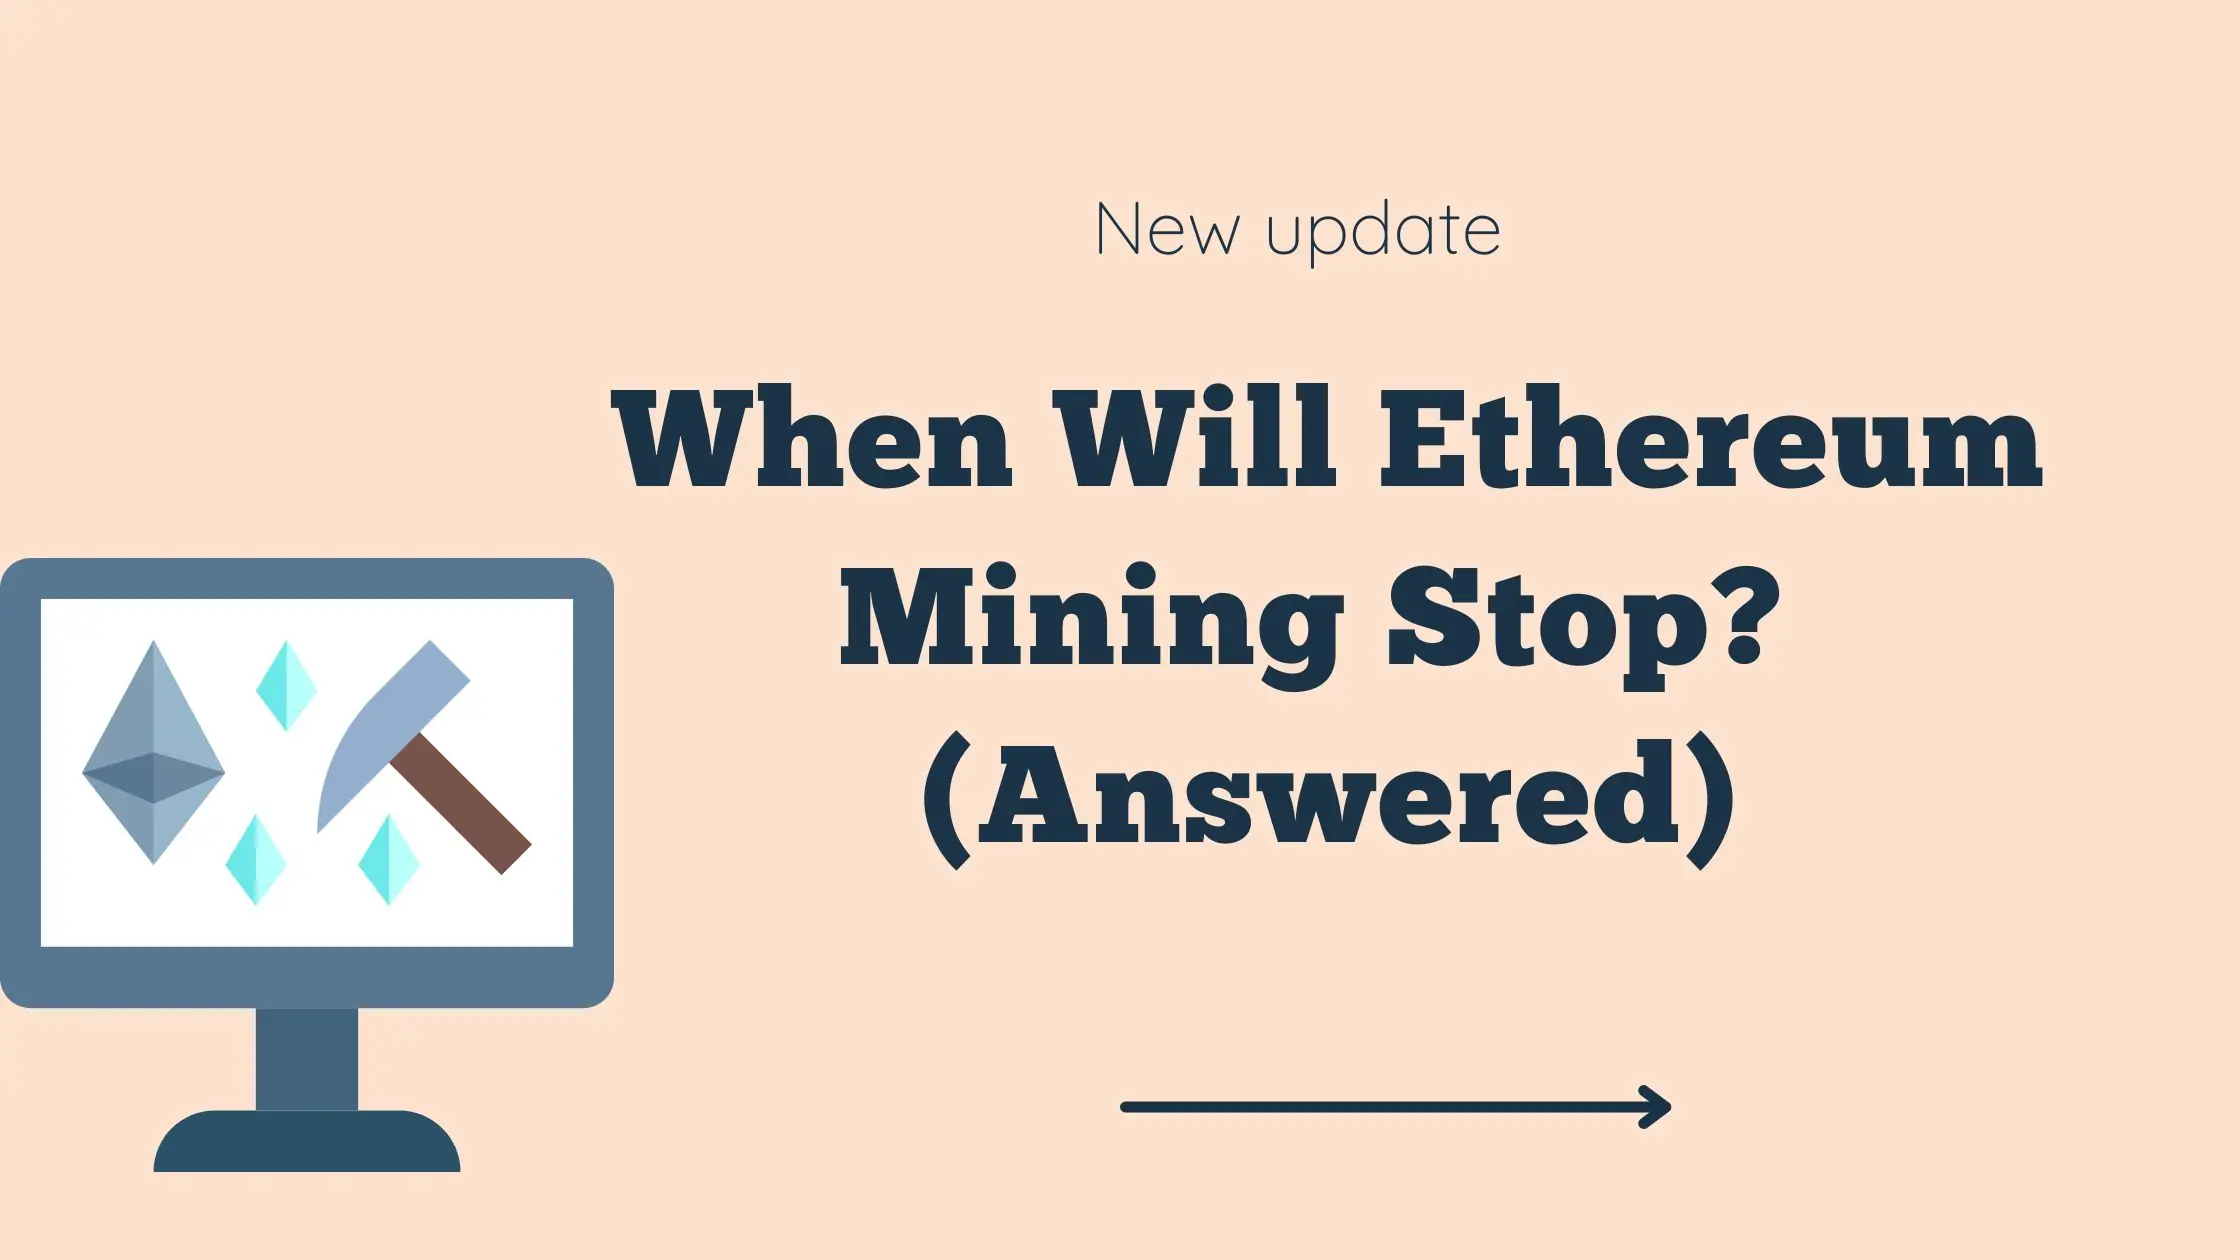 When Will Ethereum Mining Stop? (Answered)